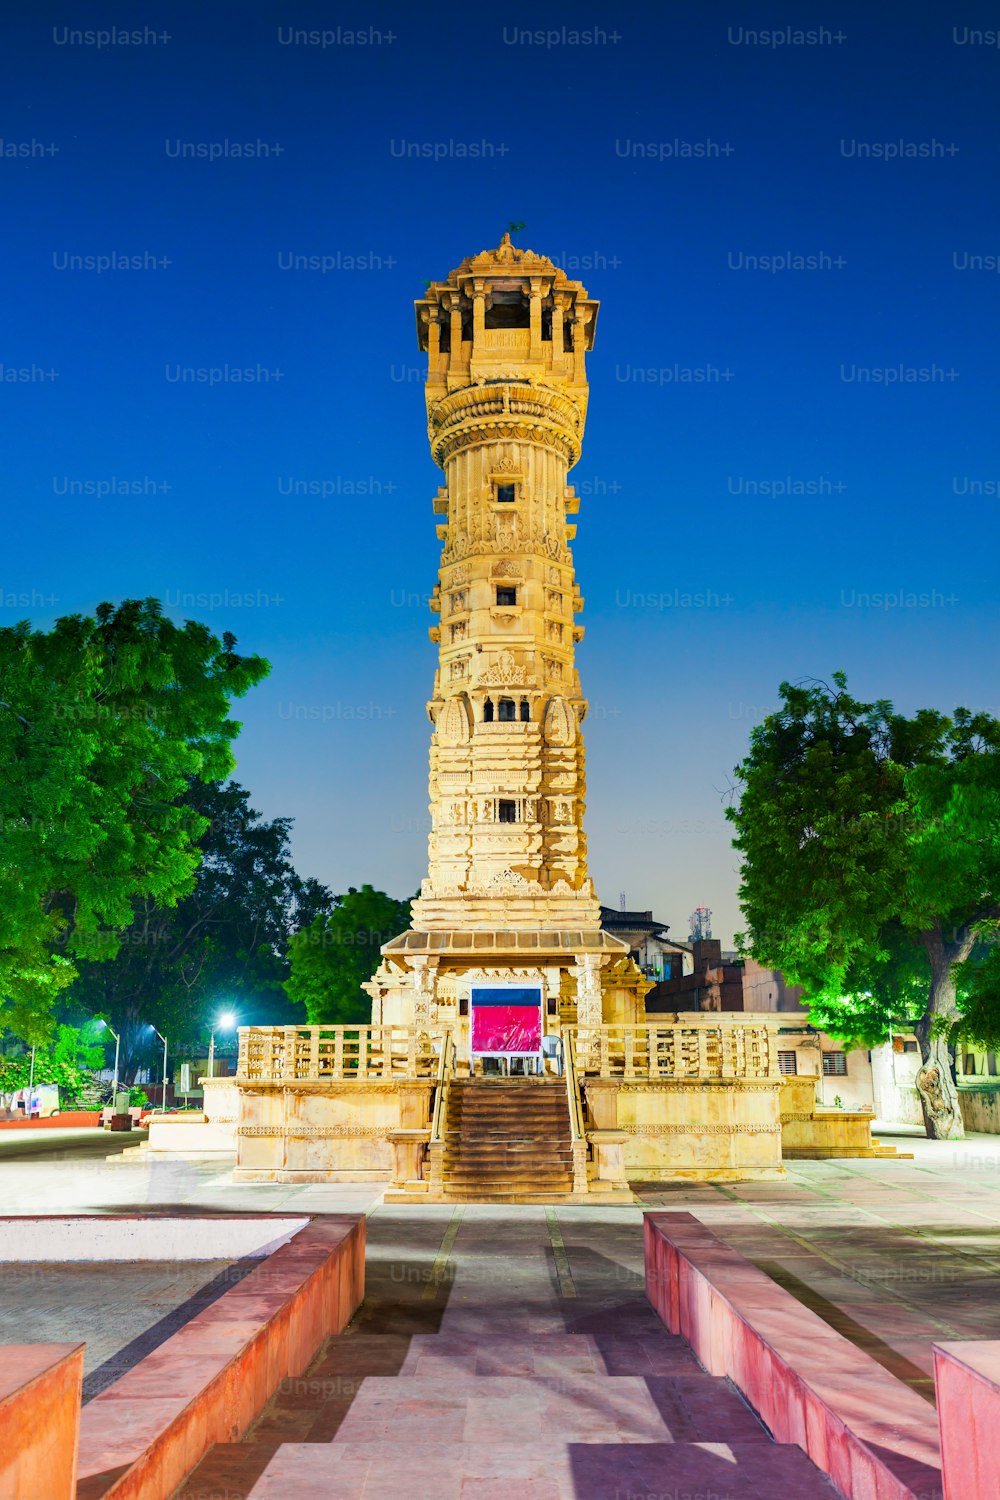 Kirti Stambh Tower at the Hutheesing Temple, the best known Jain temple in Ahmedabad city in Gujarat state of India